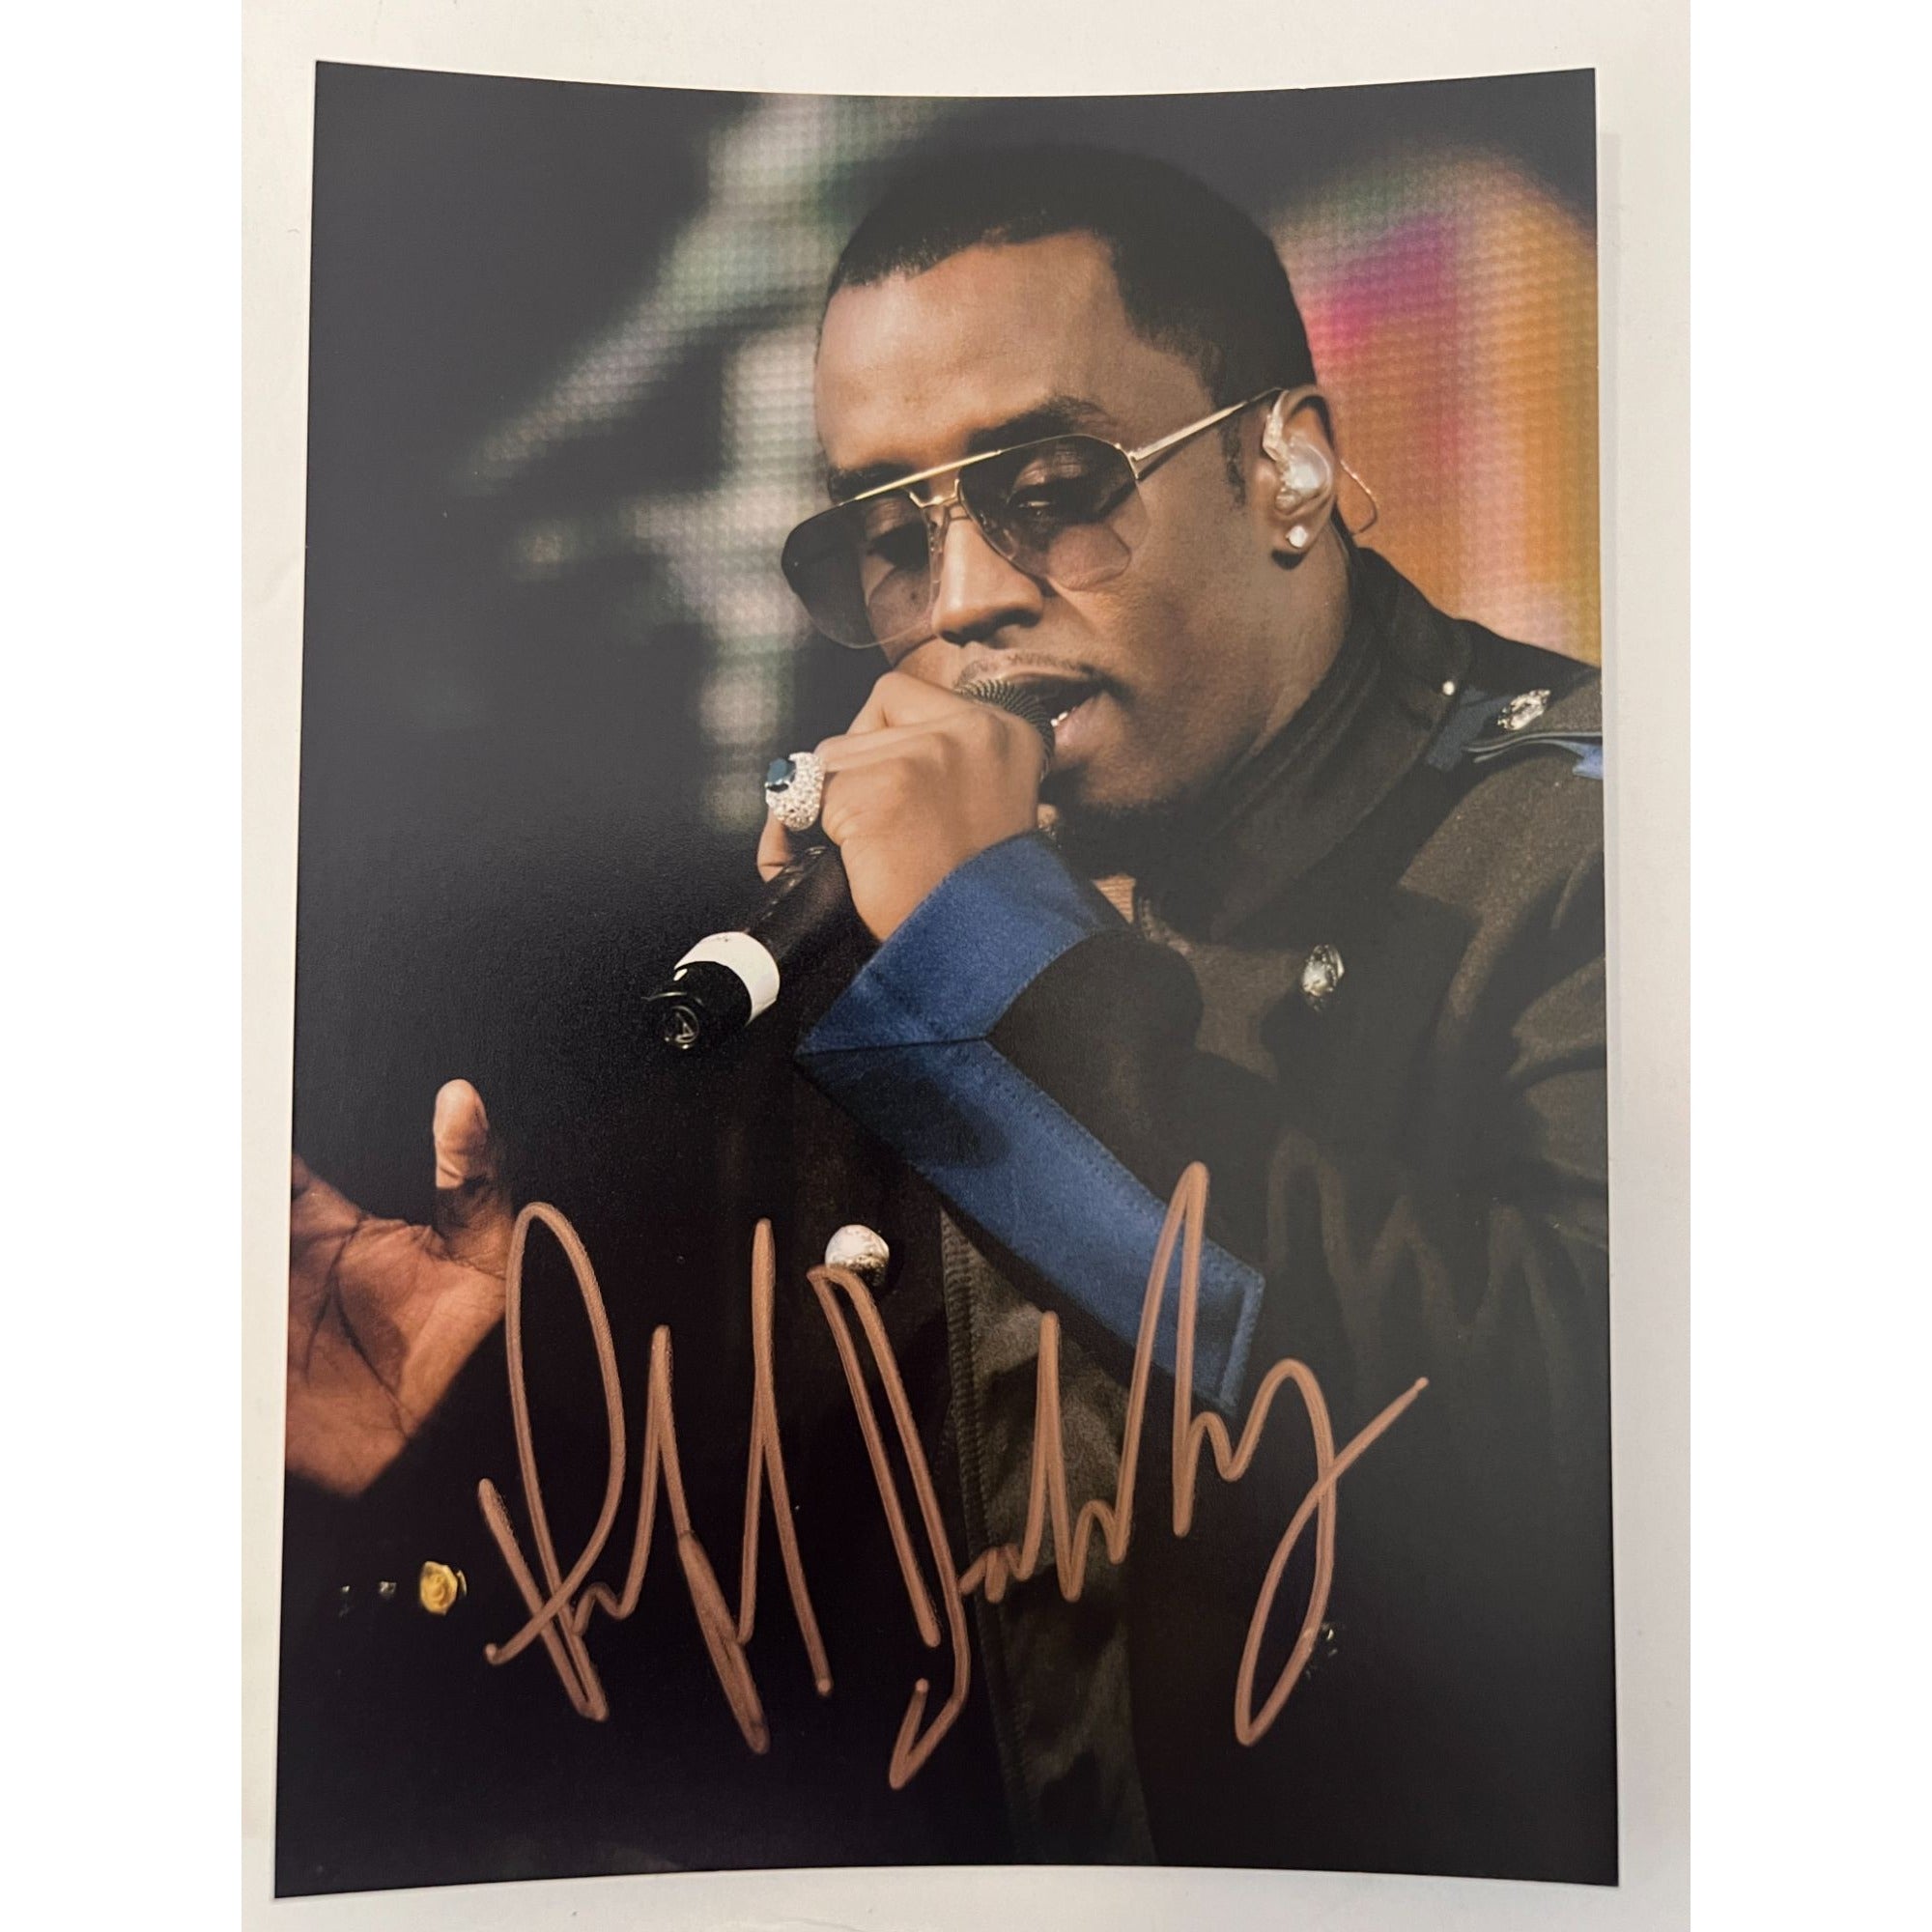 Sean John Combs *Puff Daddy* 5x7 photograph  signed with proof